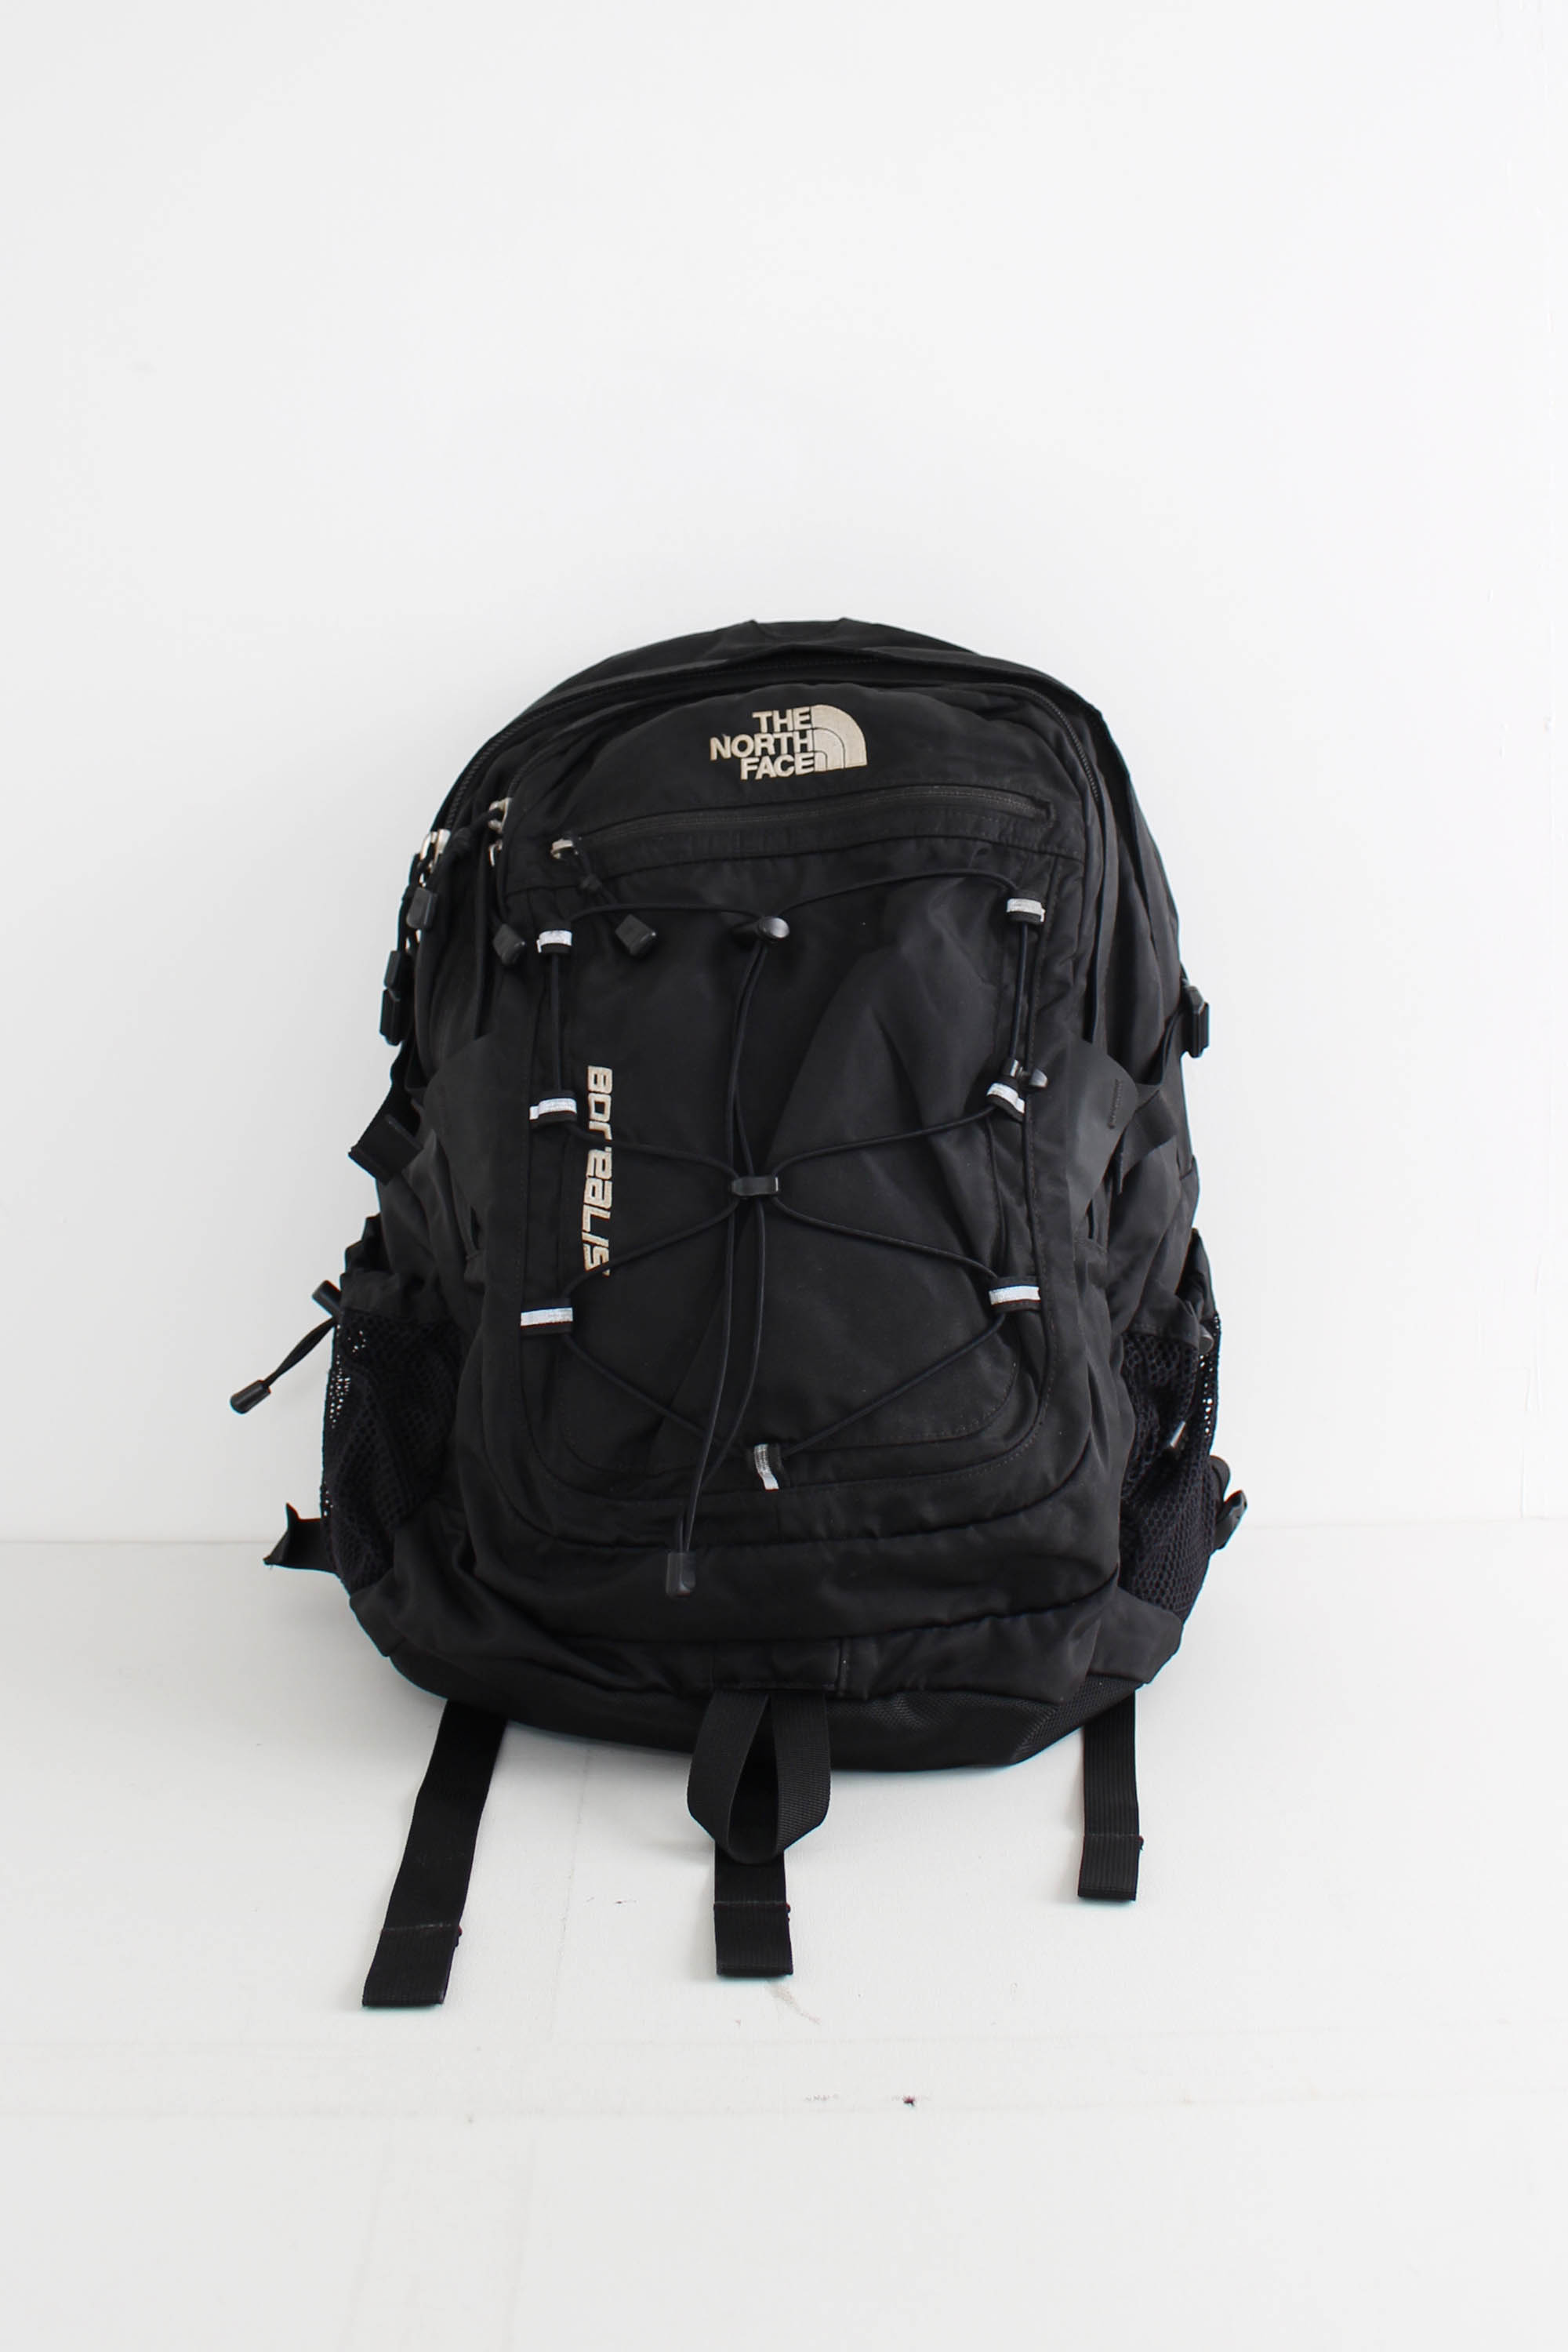 THE NORTH FACE borealis backpack